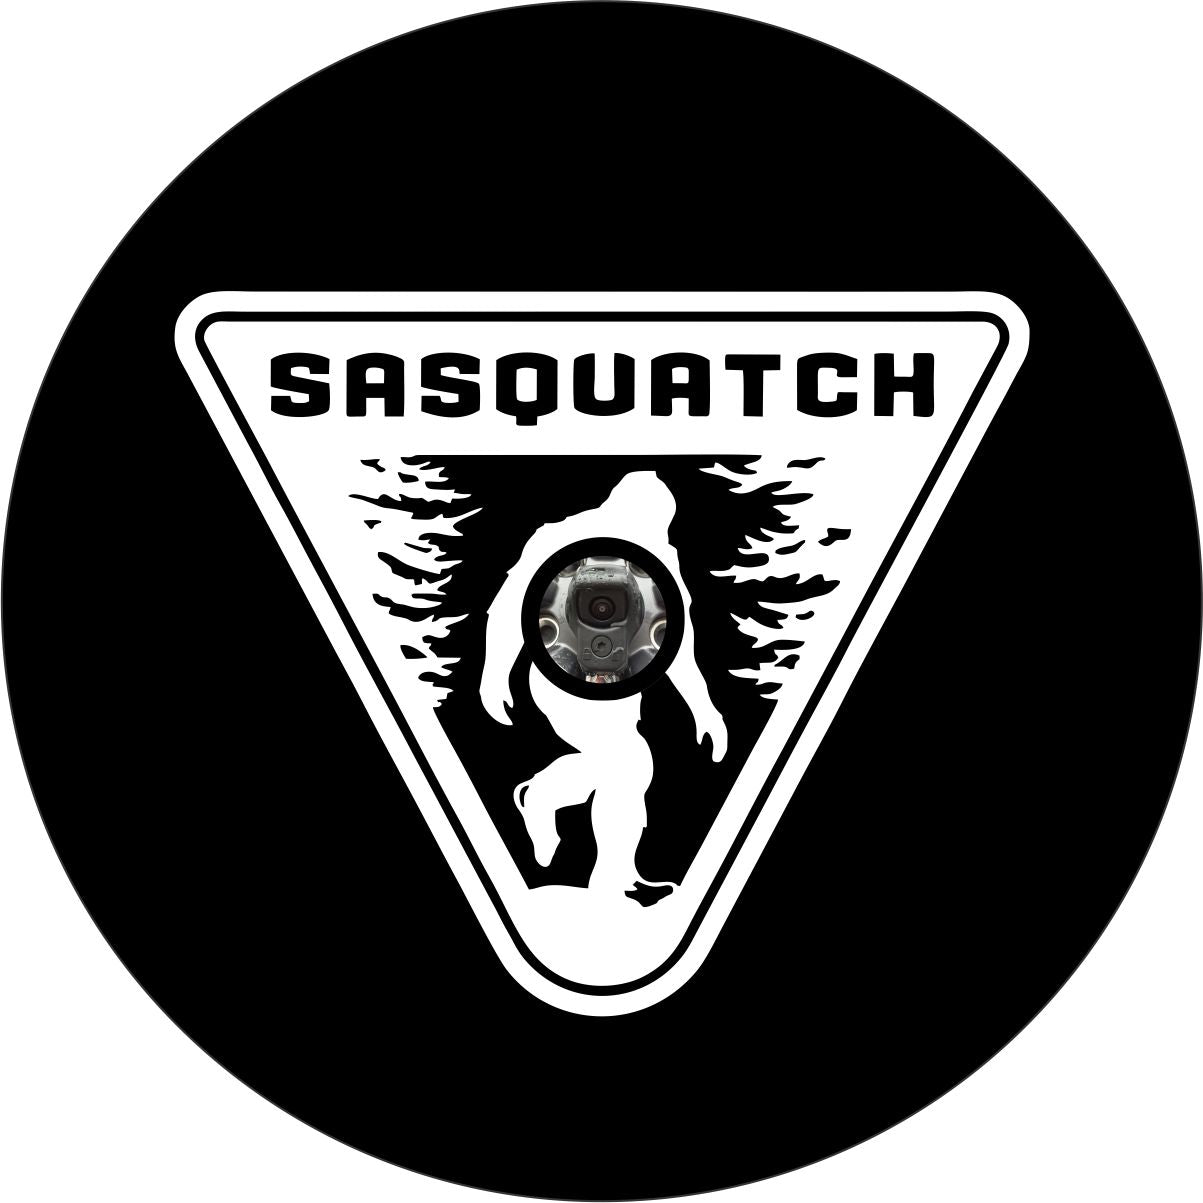 Mock up for a black vinyl Sasquatch spare tire cover design. White upside down triangle sign with a bigfoot silhouette and the work Sasquatch across the top with a hole in the center intended for vehicle makes and models that have a backup camera on their spare tire.